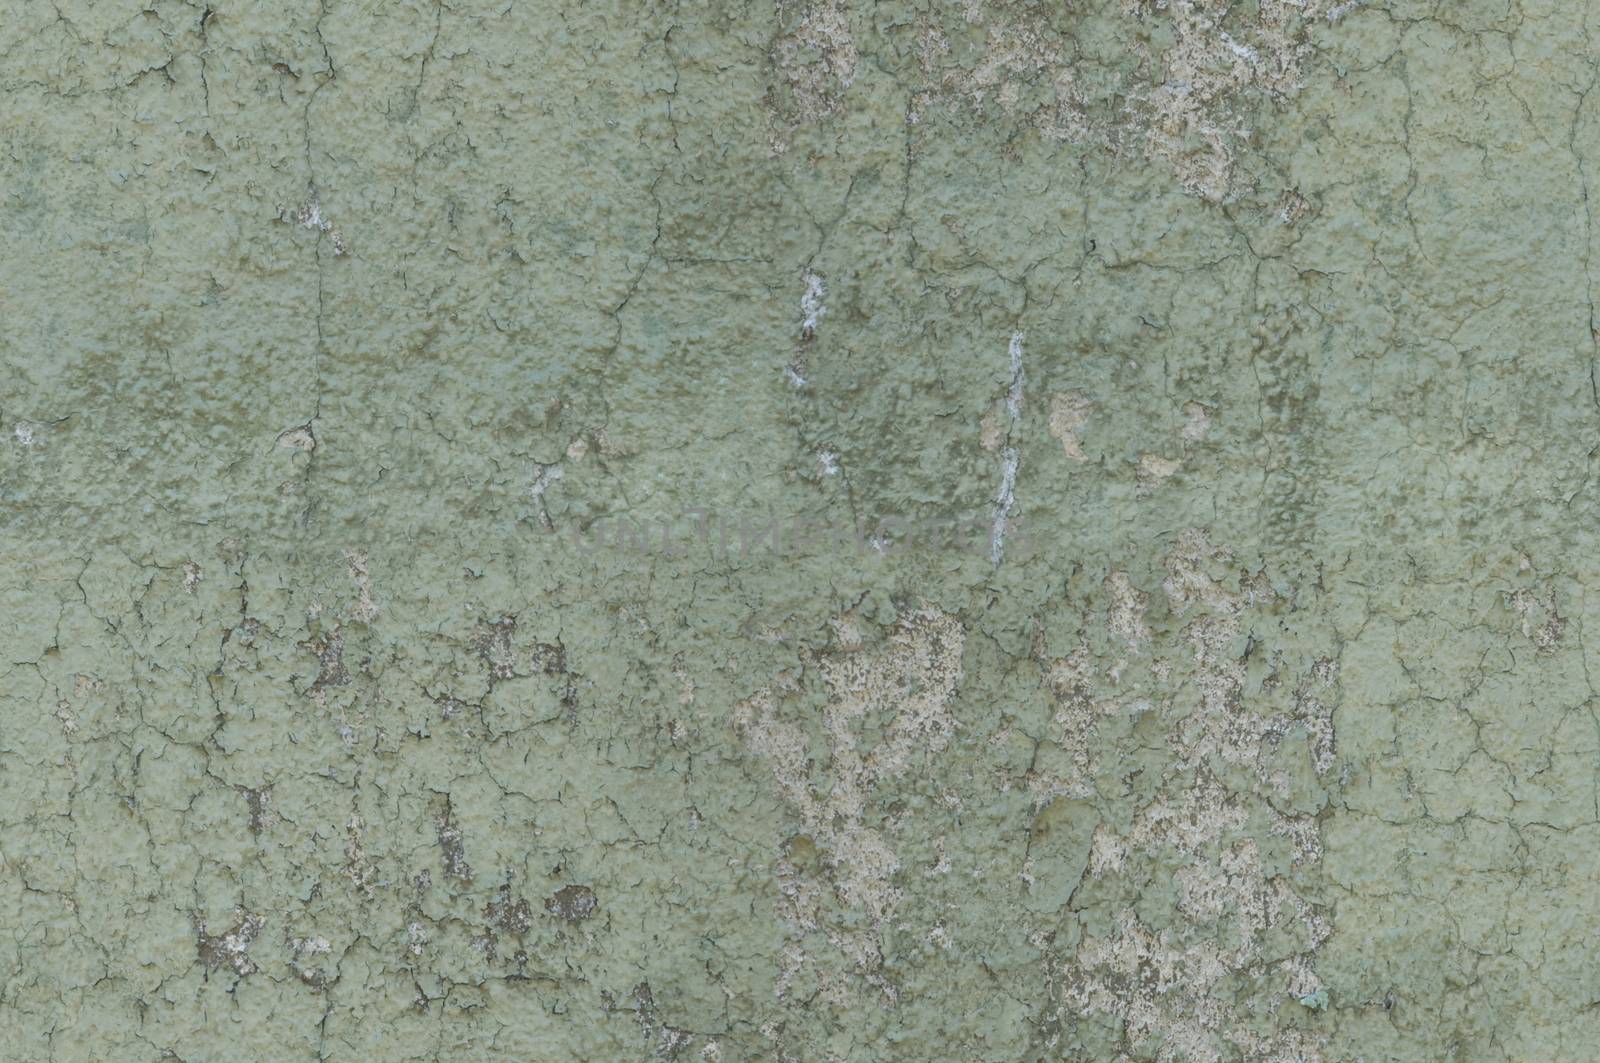 Grayish Green Weathered and Distressed Textured Background Wall  by Balefire9